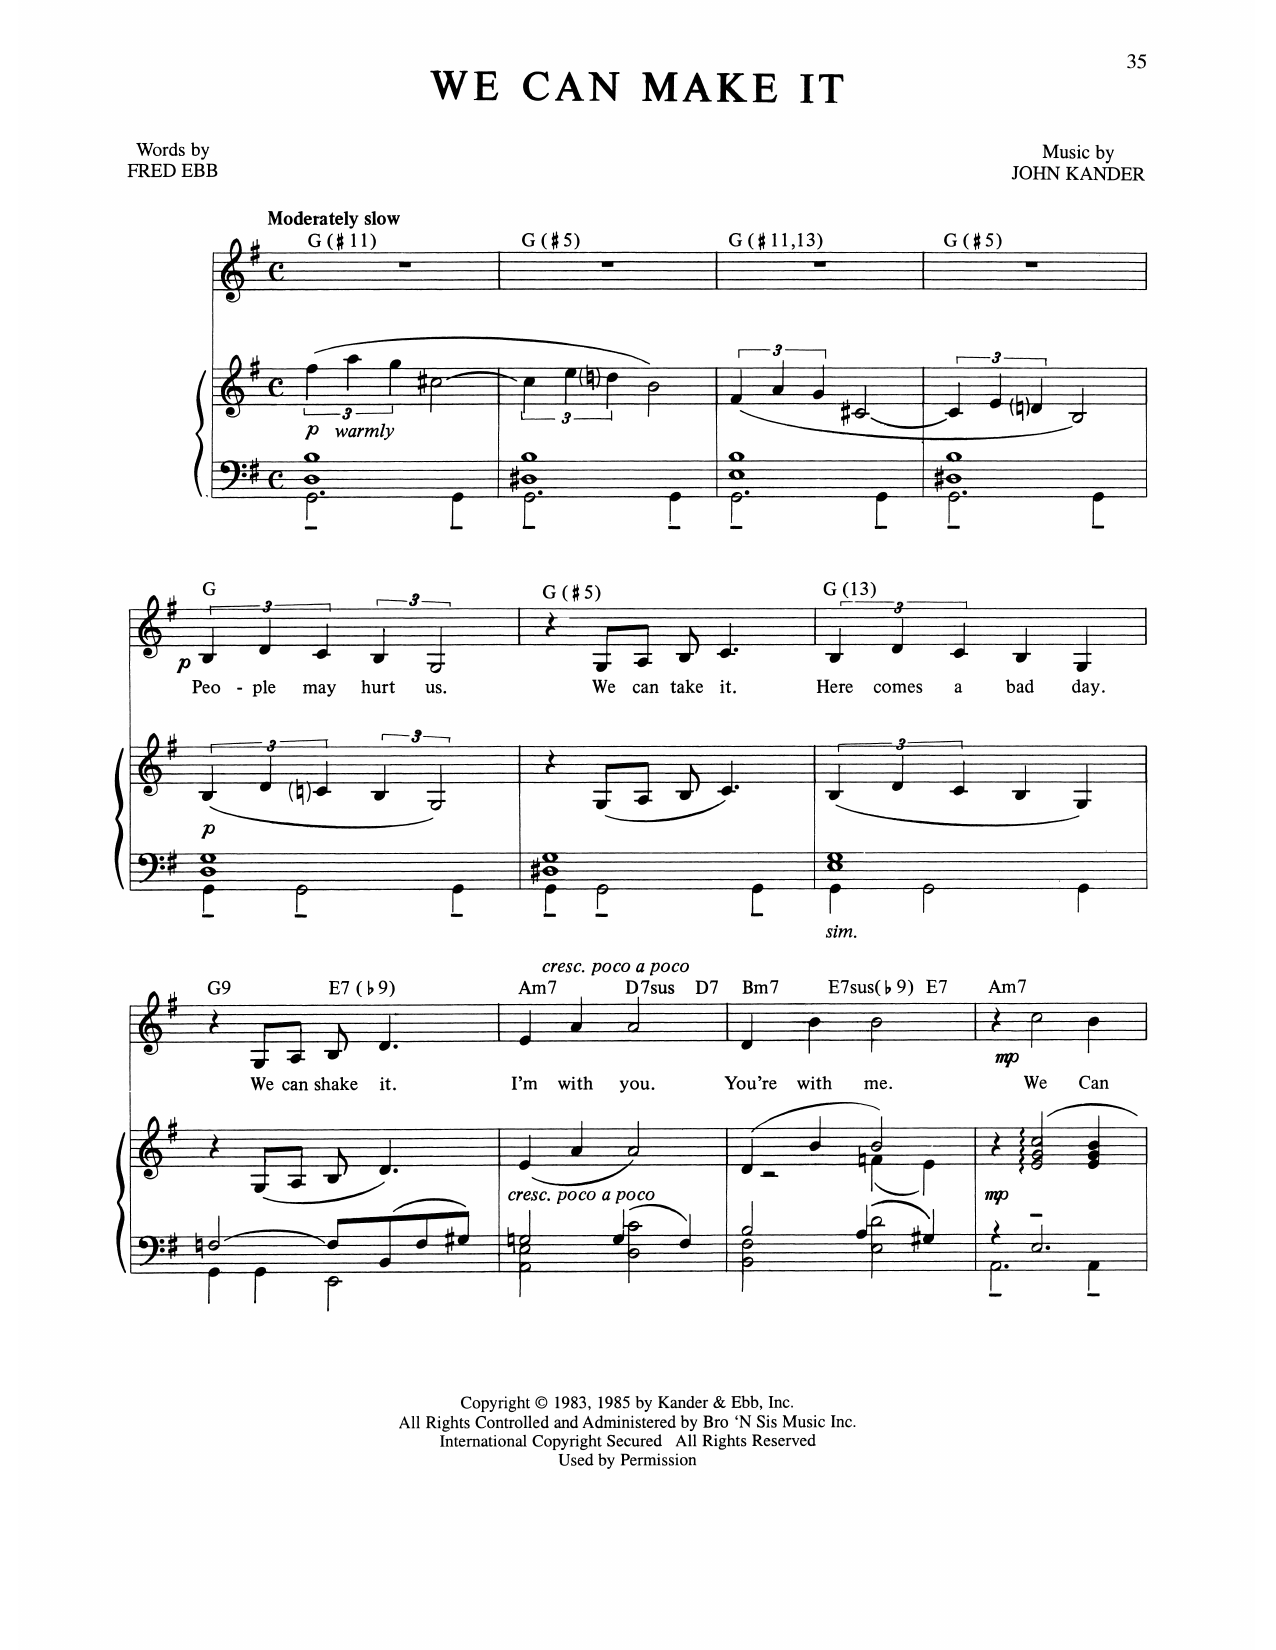 Download Kander & Ebb We Can Make It (from The Rink) Sheet Music